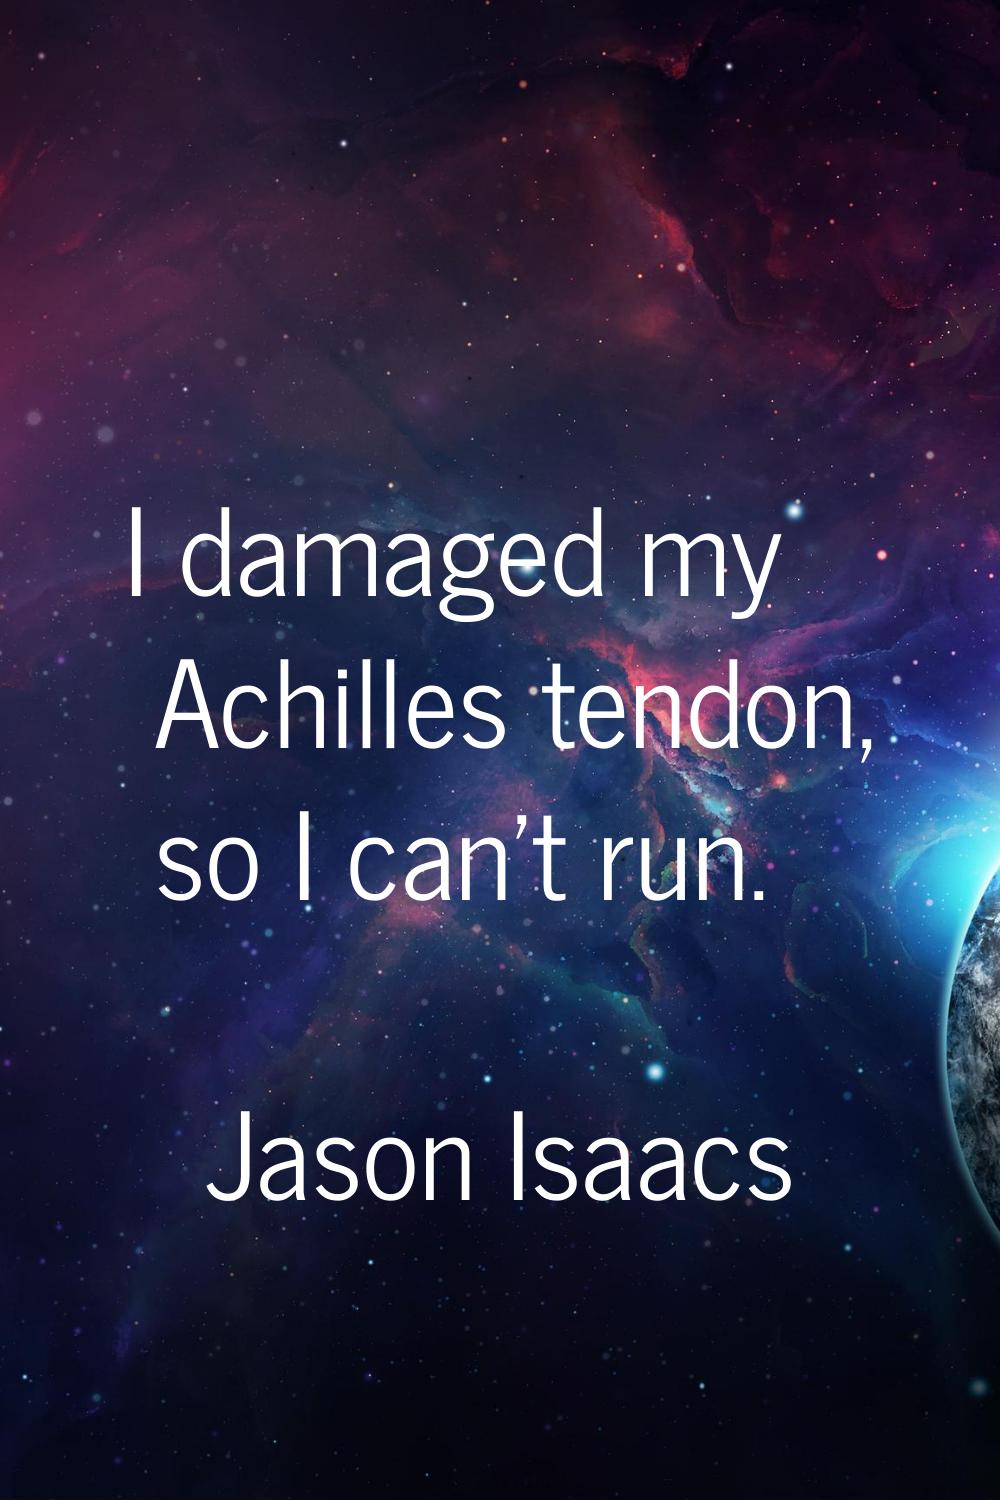 I damaged my Achilles tendon, so I can't run.